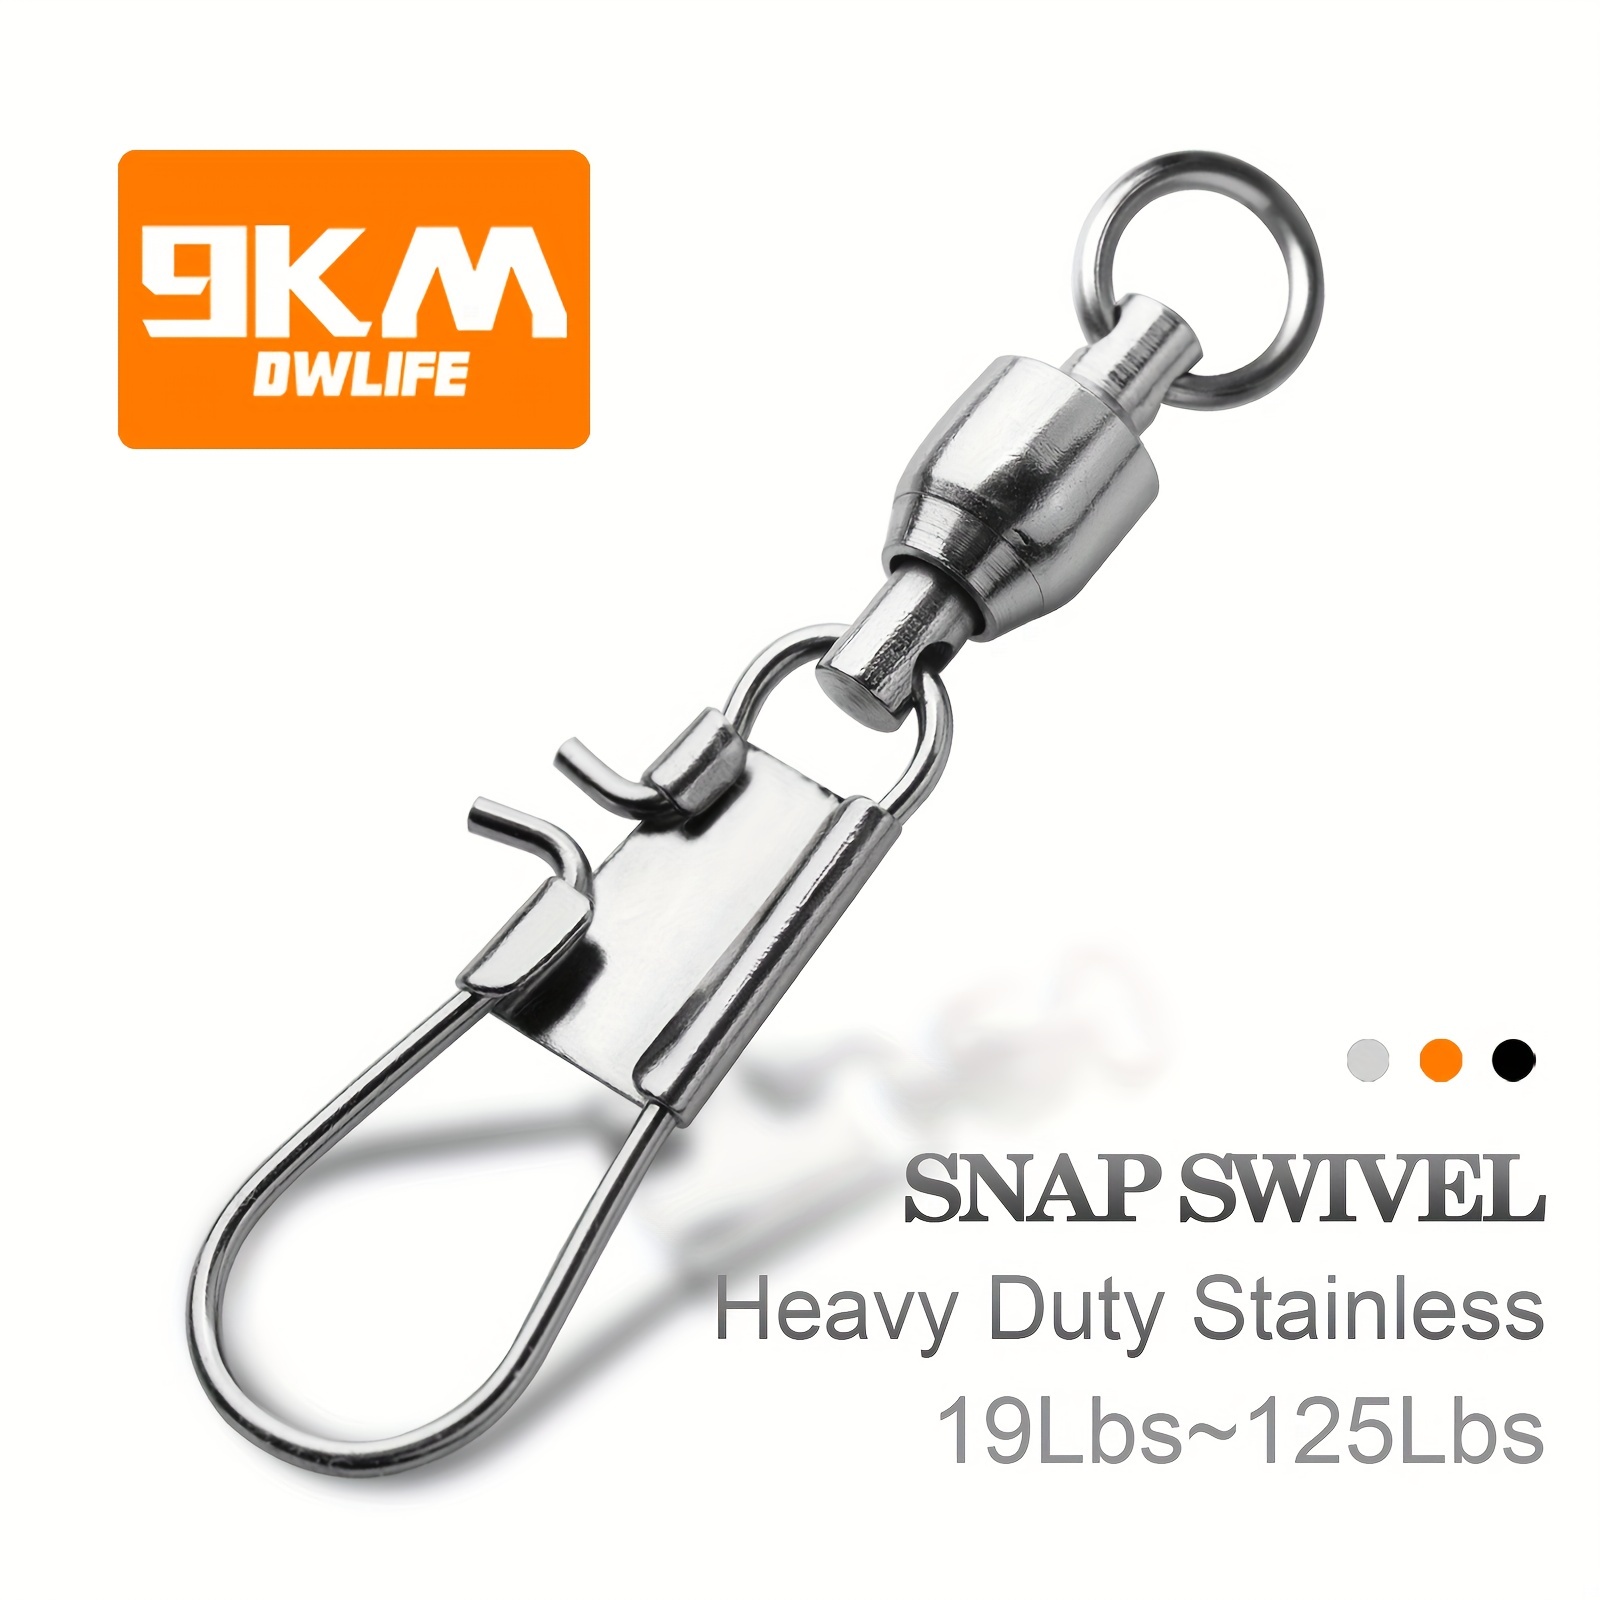 

Heavy Duty Stainless Steel Fishing Swivels With Interlock Snap - Ideal For Saltwater And Freshwater Fishing, 9km Ball Bearing For Smooth Rotation